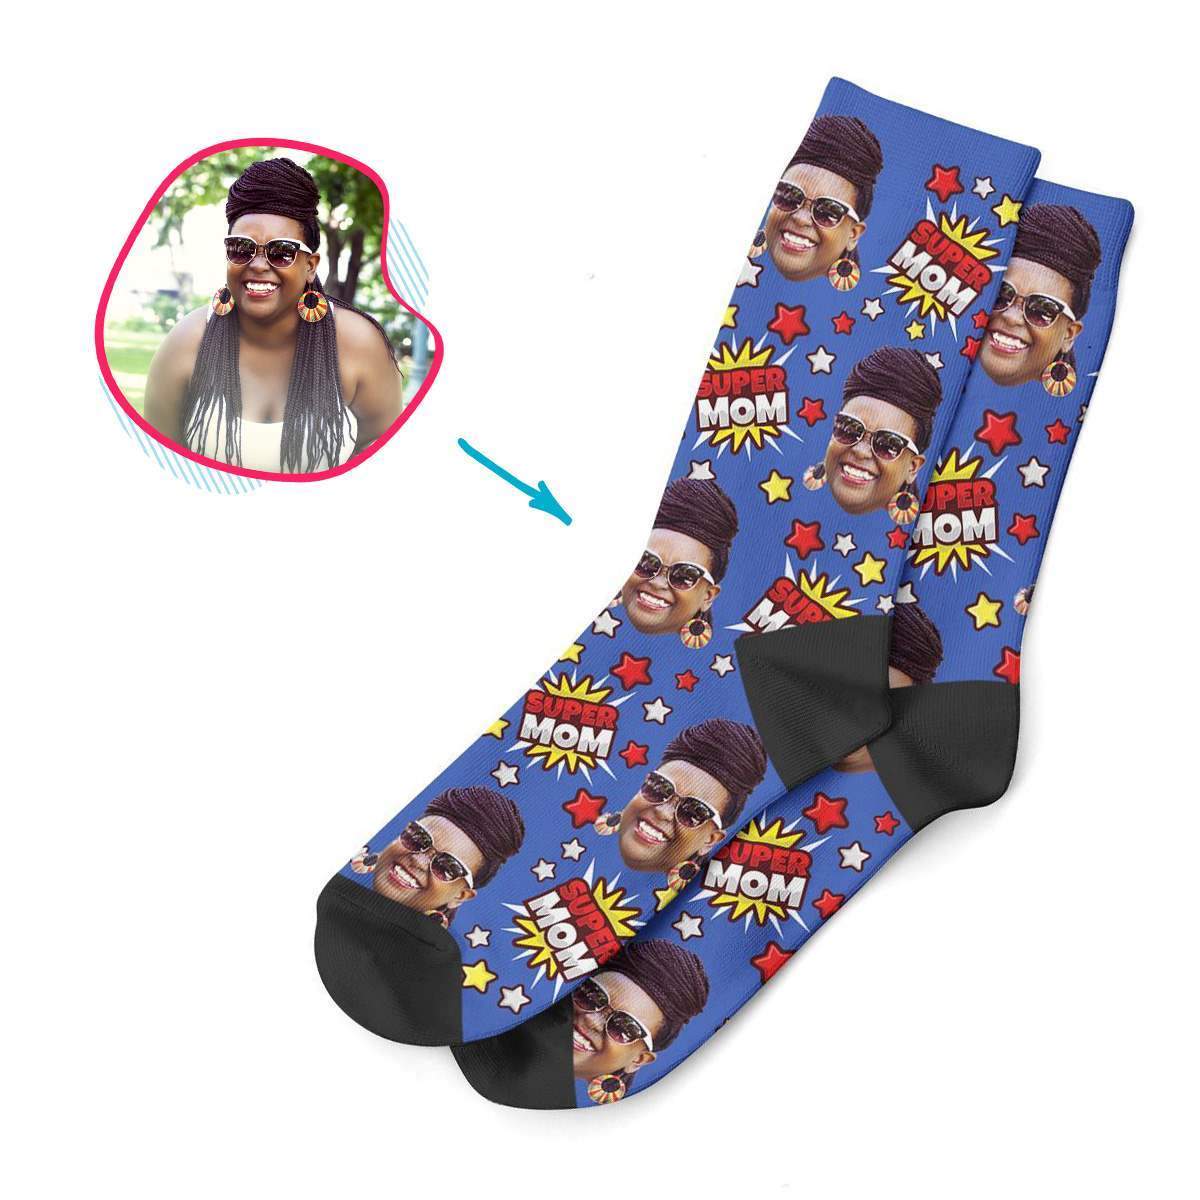 darkblue Super Mom socks personalized with photo of face printed on them